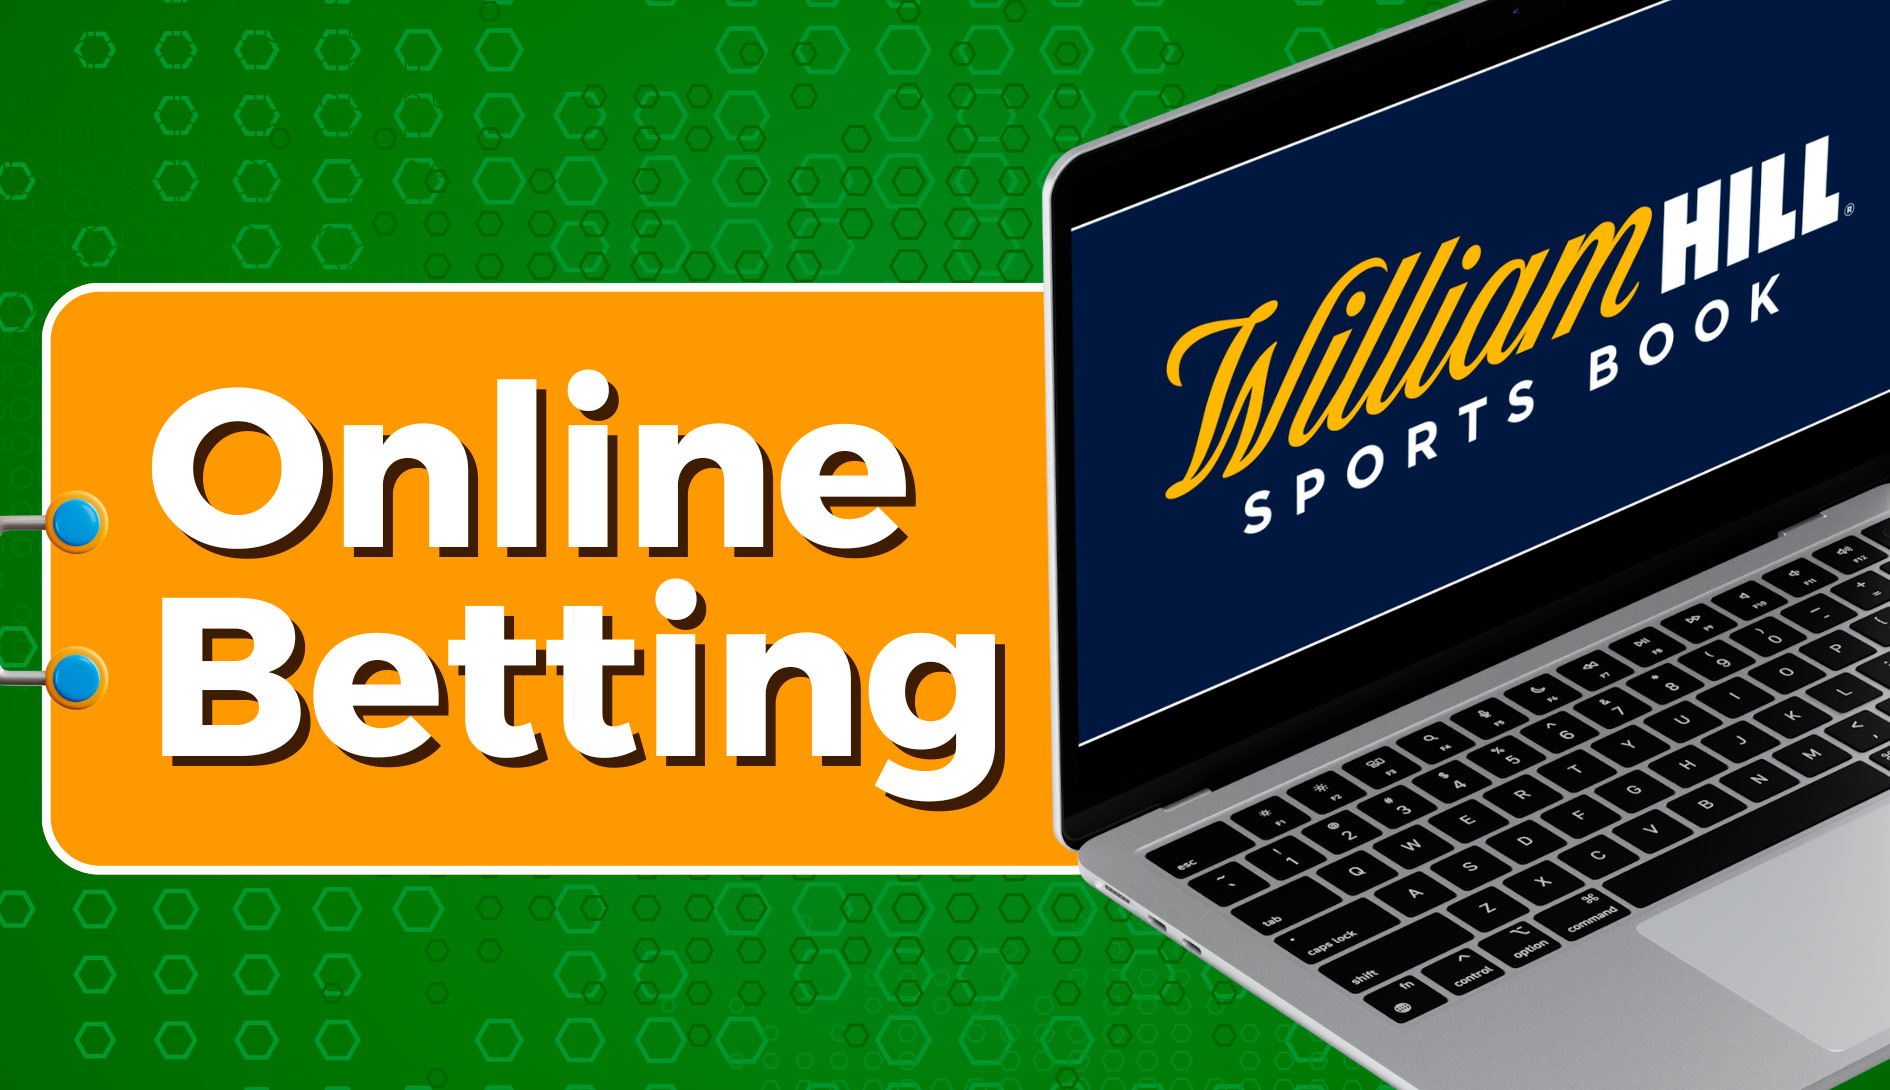 William Hill - The Ultimate Destination for Online Betting and Gaming